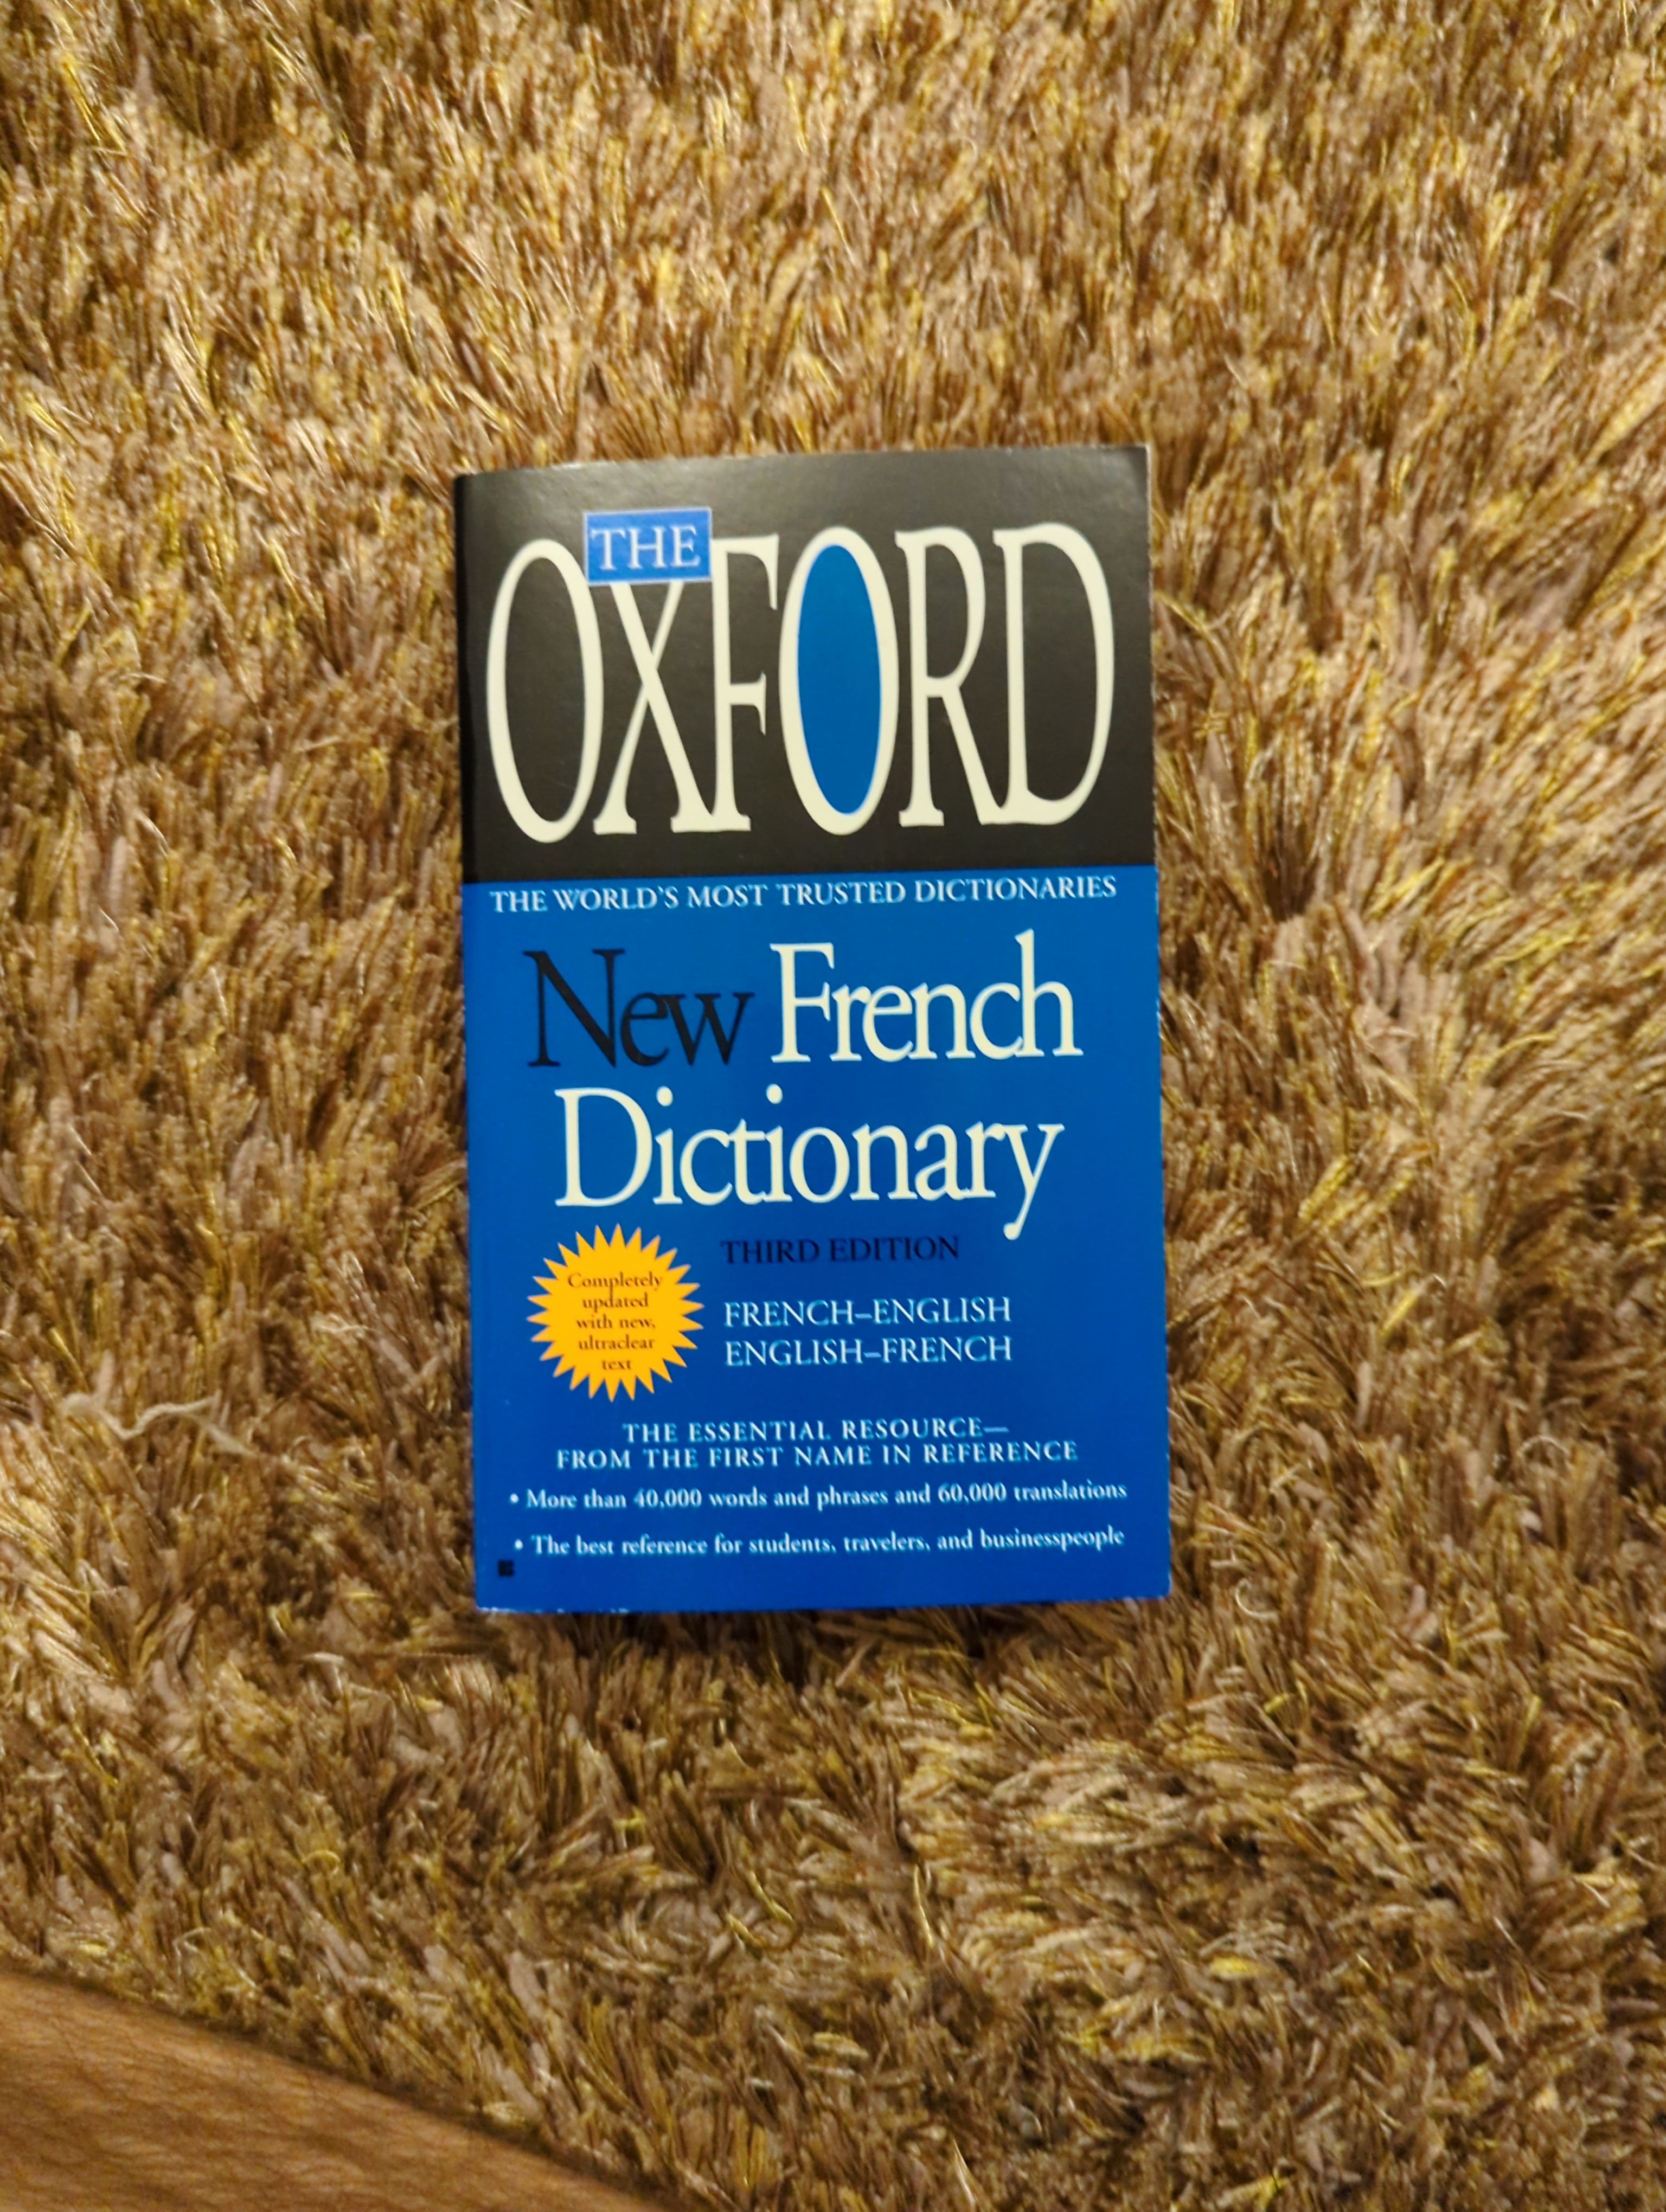 Oxford　Pango　New　Paperback　French　Staff,　Oxford　Press　University　by　Dictionary　The　Books